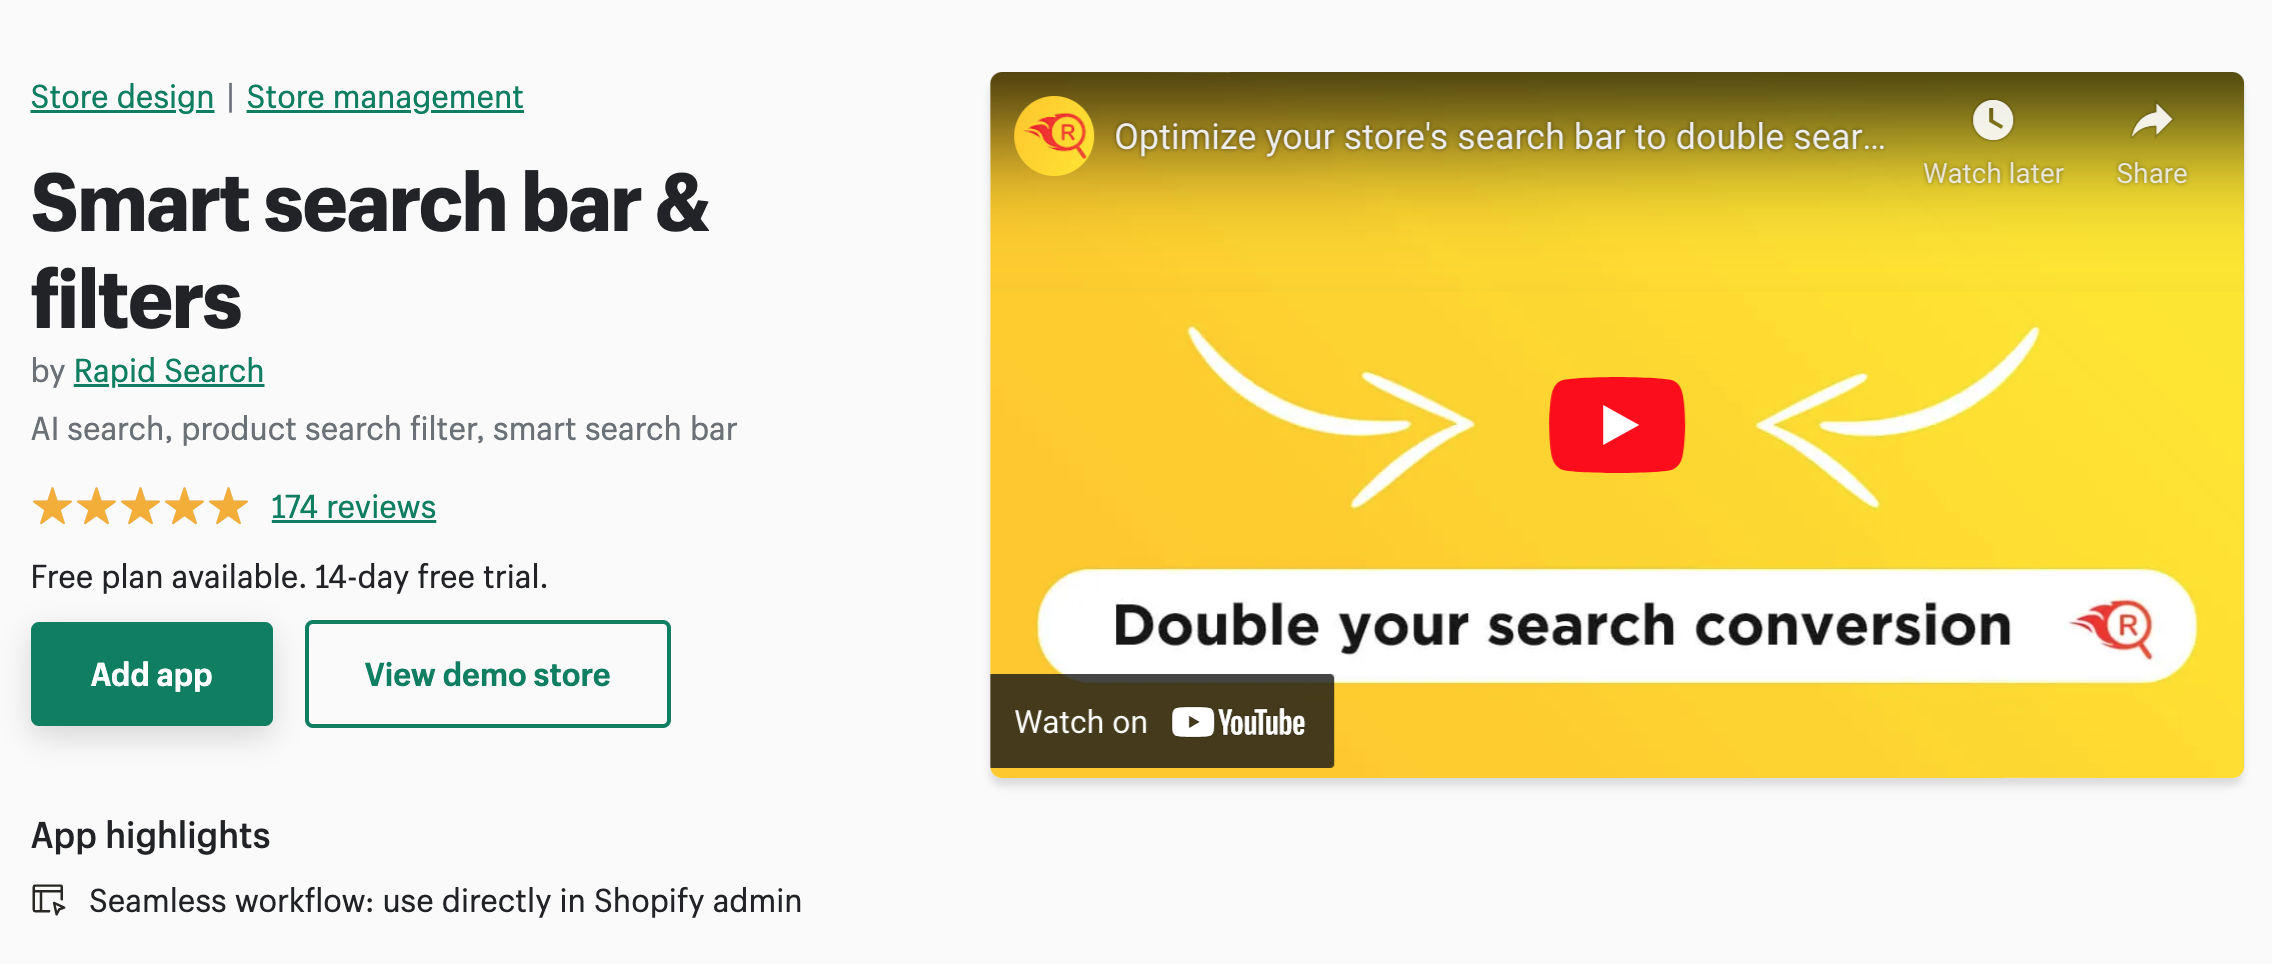 Smart Search Bar & Filters by Rapid Search